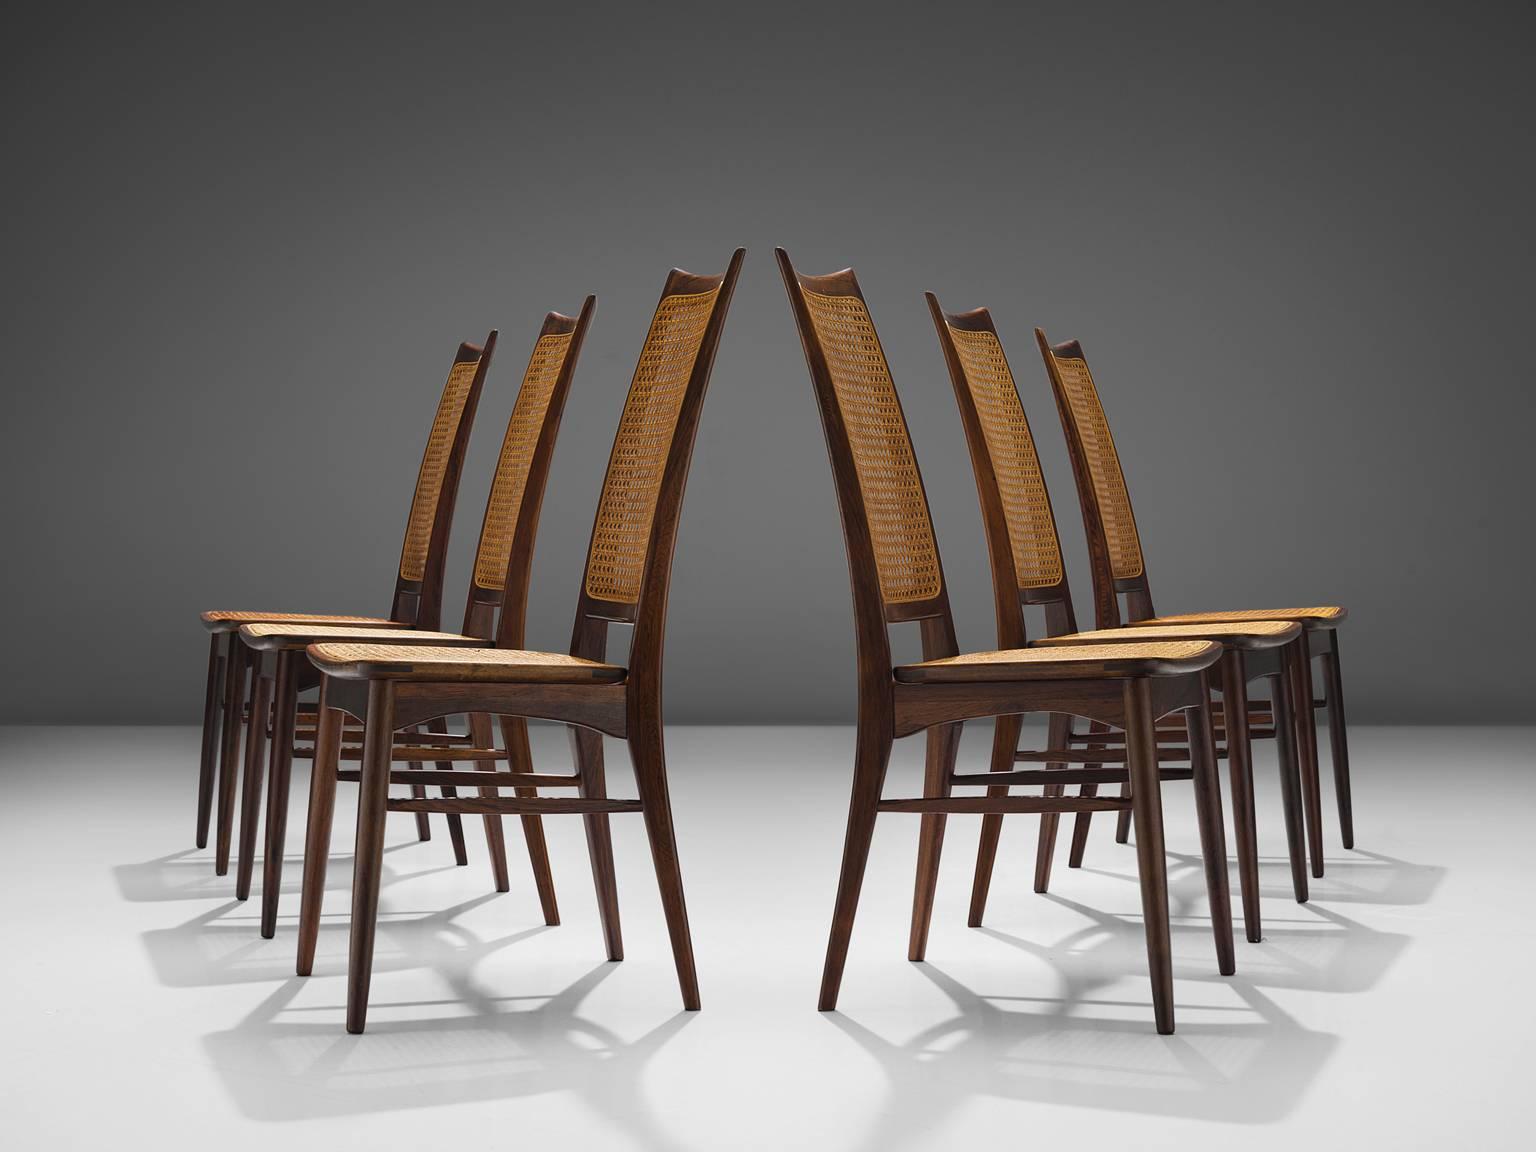 Rare Niels Koefoed Set of Six Rosewood Dining Chairs (Dänisch)